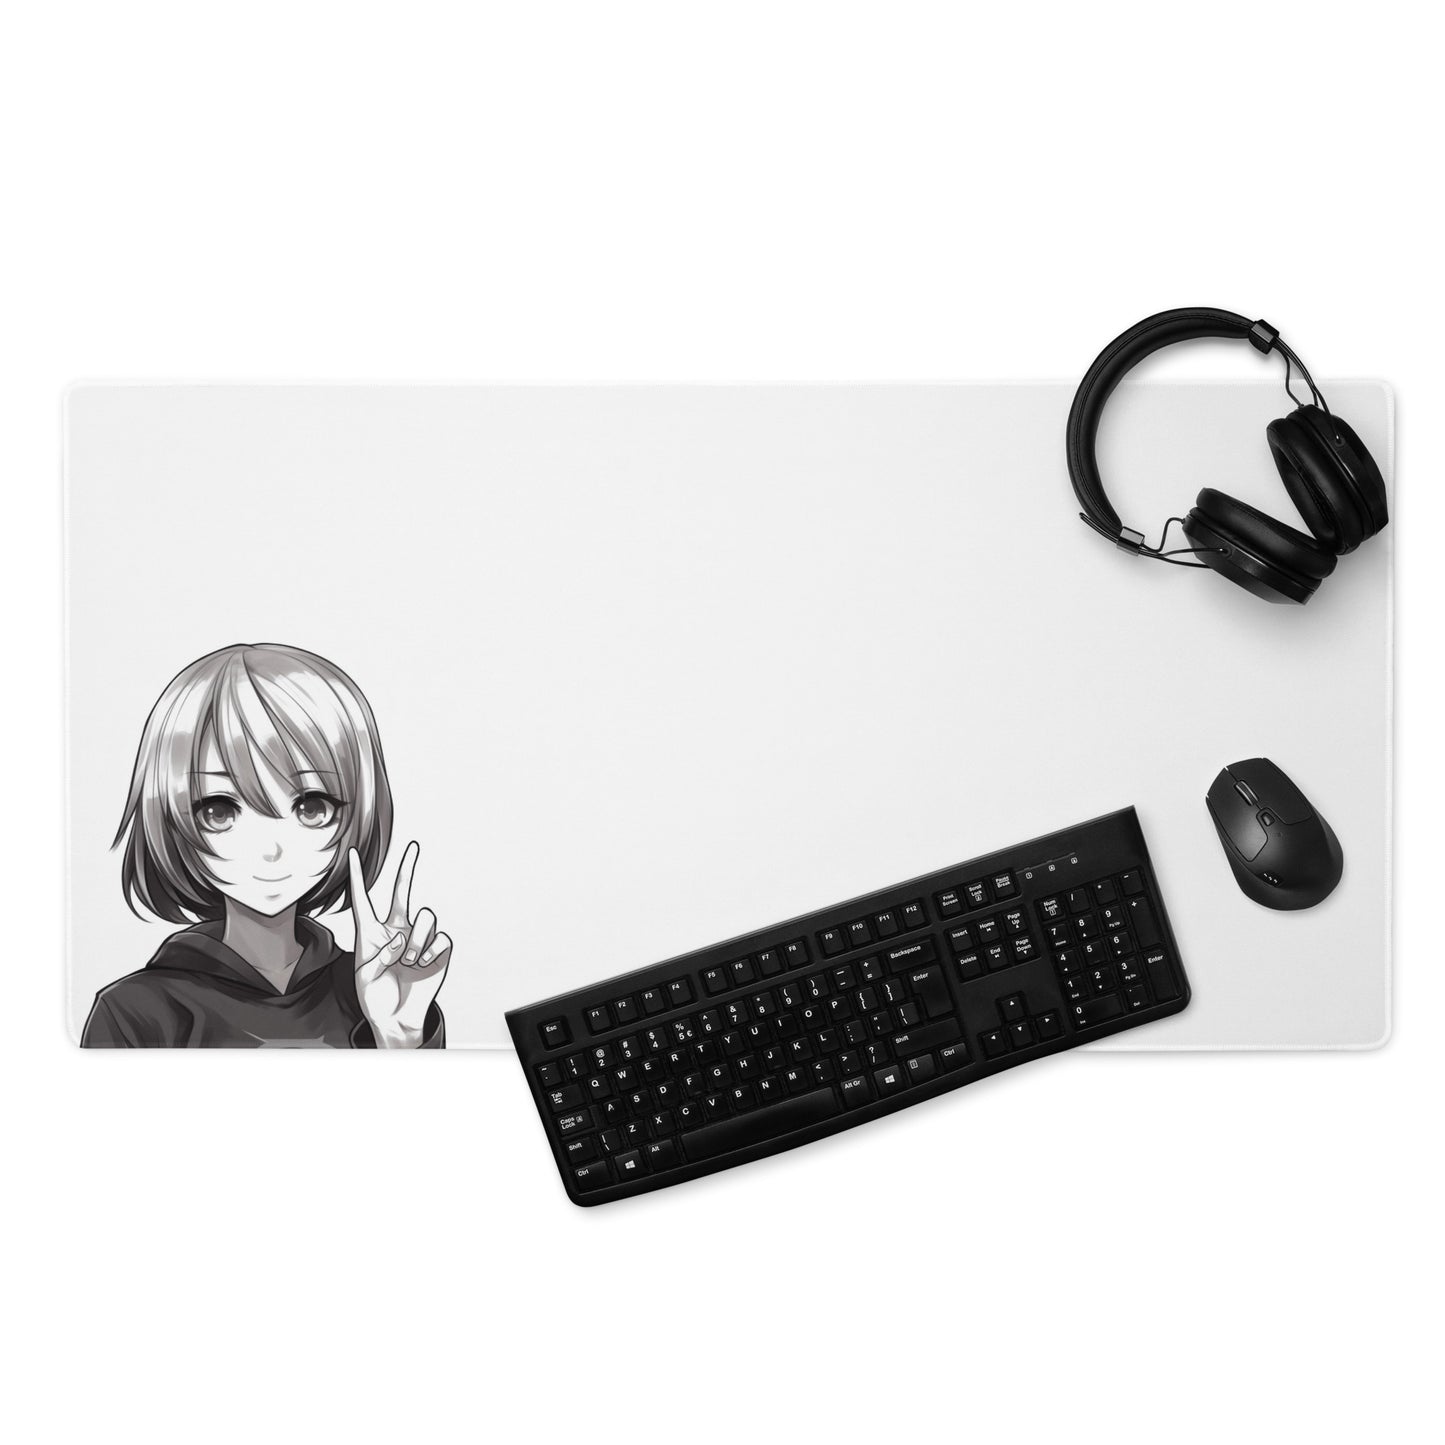 A 36" x 18" black and white desk pad with an anime girl making a peace sign. With a keyboard, mouse, and headphones sitting on it